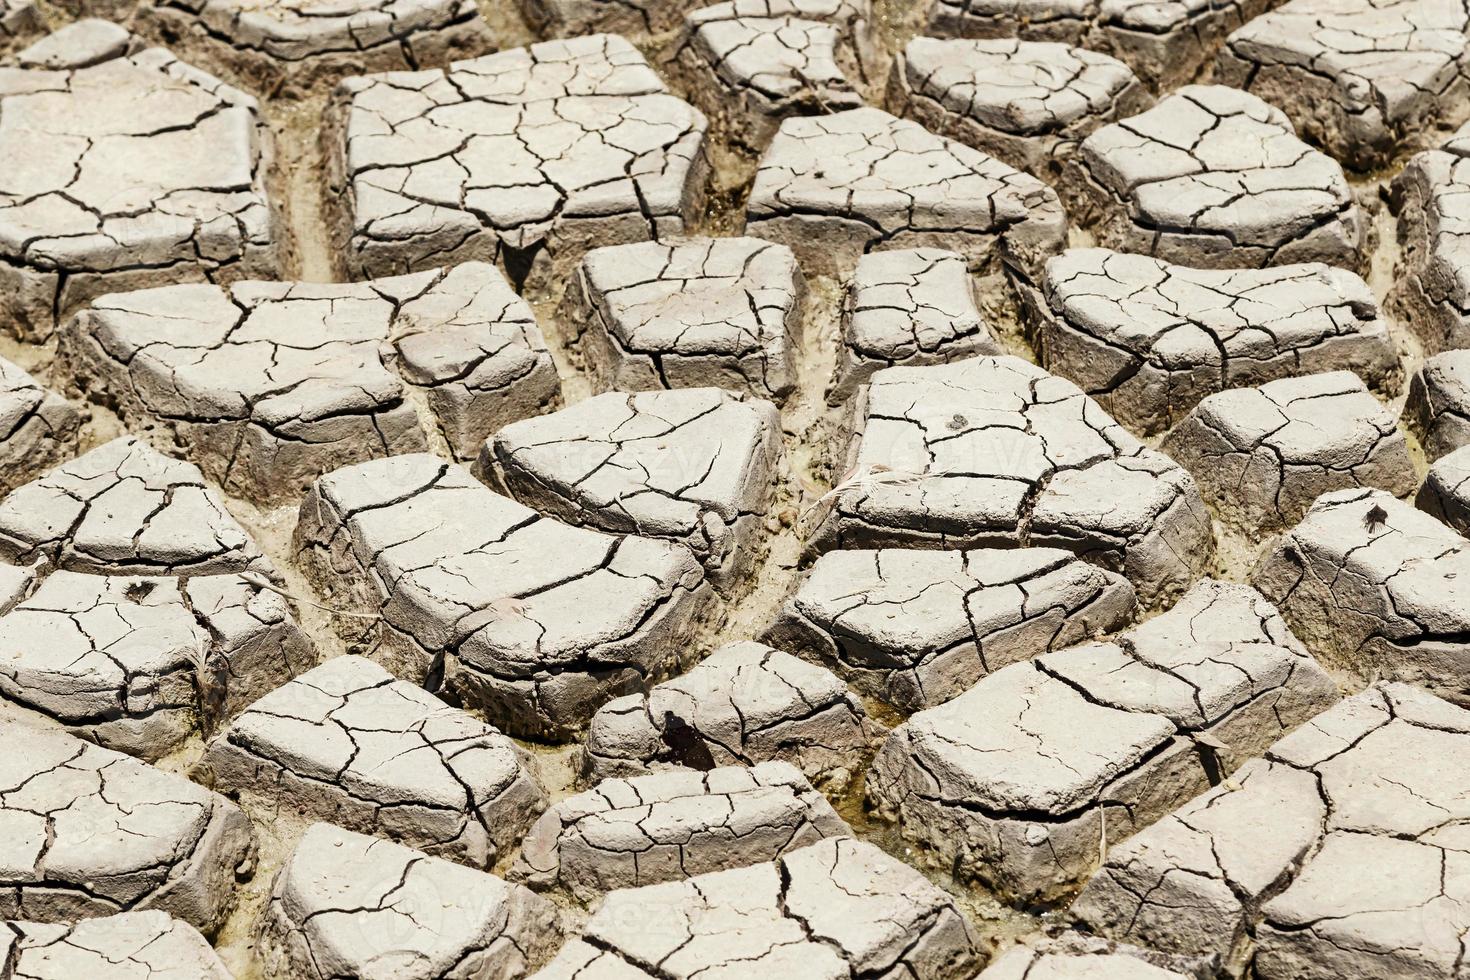 Dry lake bed. Drought ground with cracks. photo